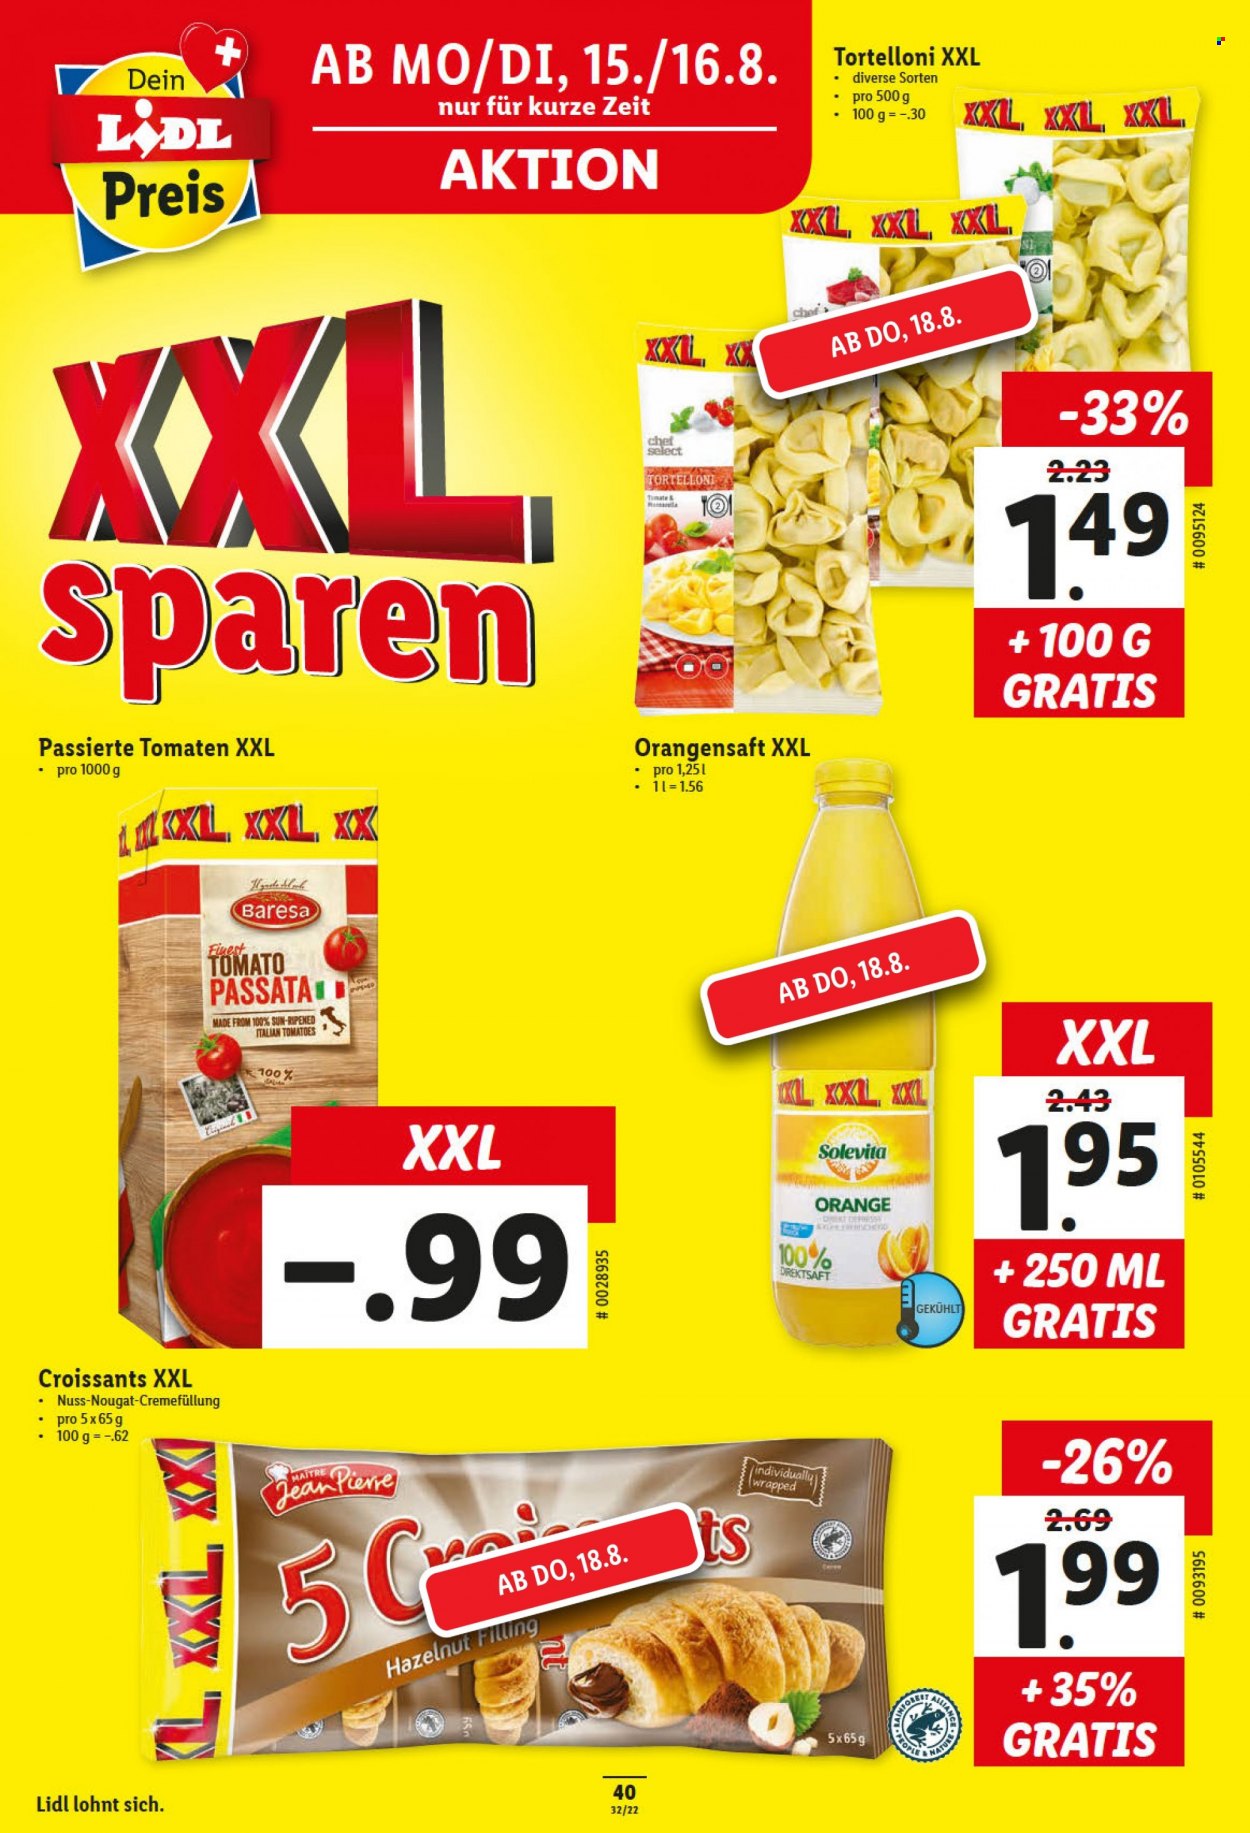 Catalogue Lidl - 11.8.2022 - 17.8.2022. Page 40.